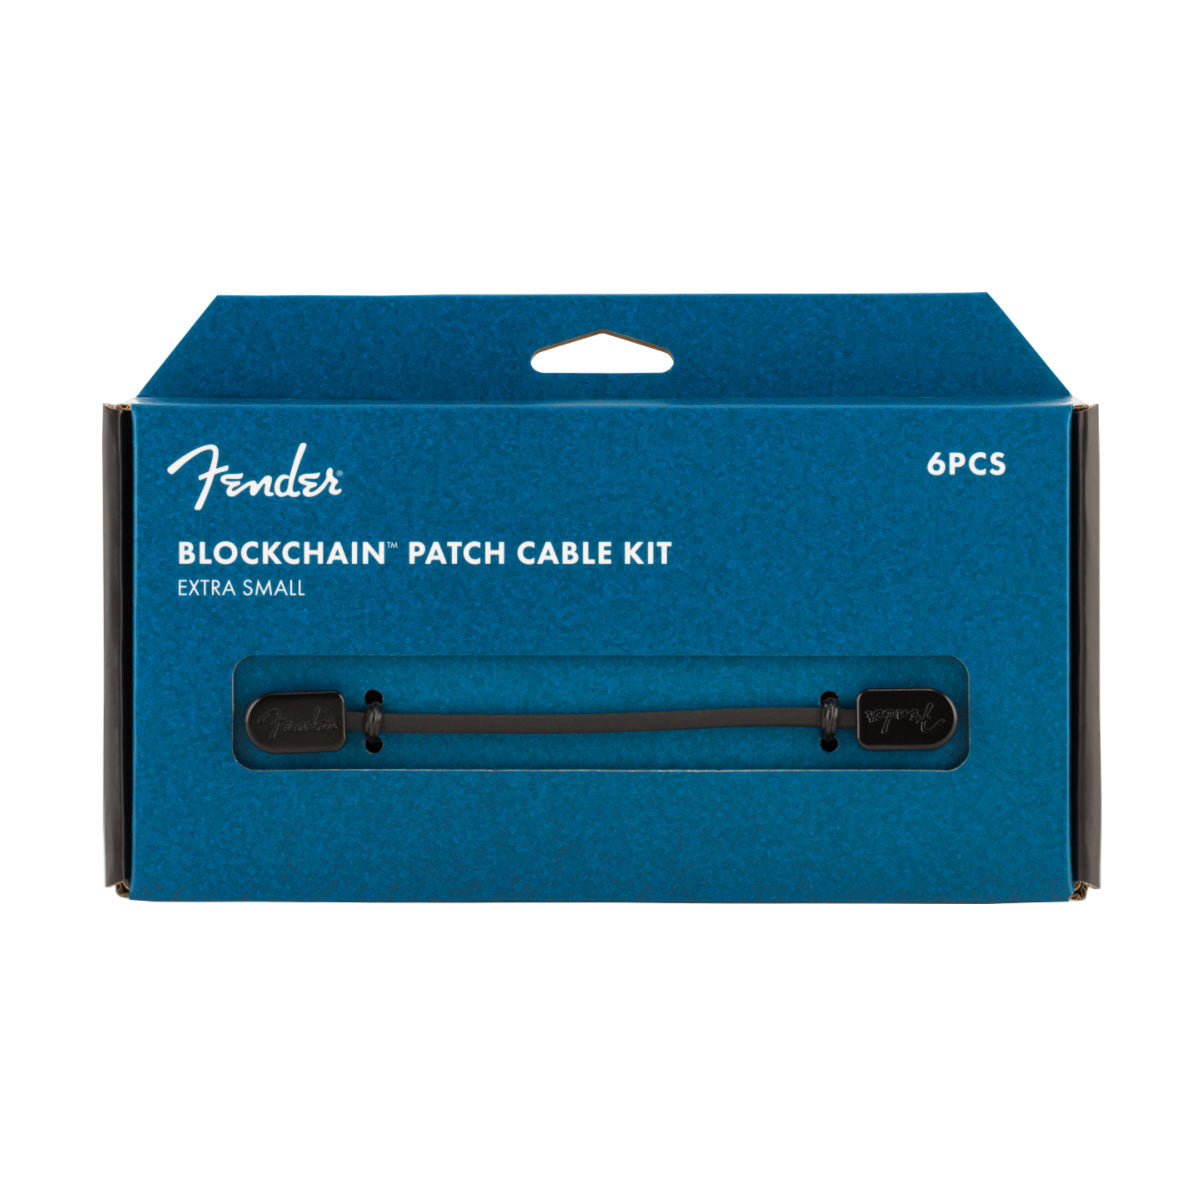 Fender Blockchain Patch Cable Kit Black Extra Small - 0990825102